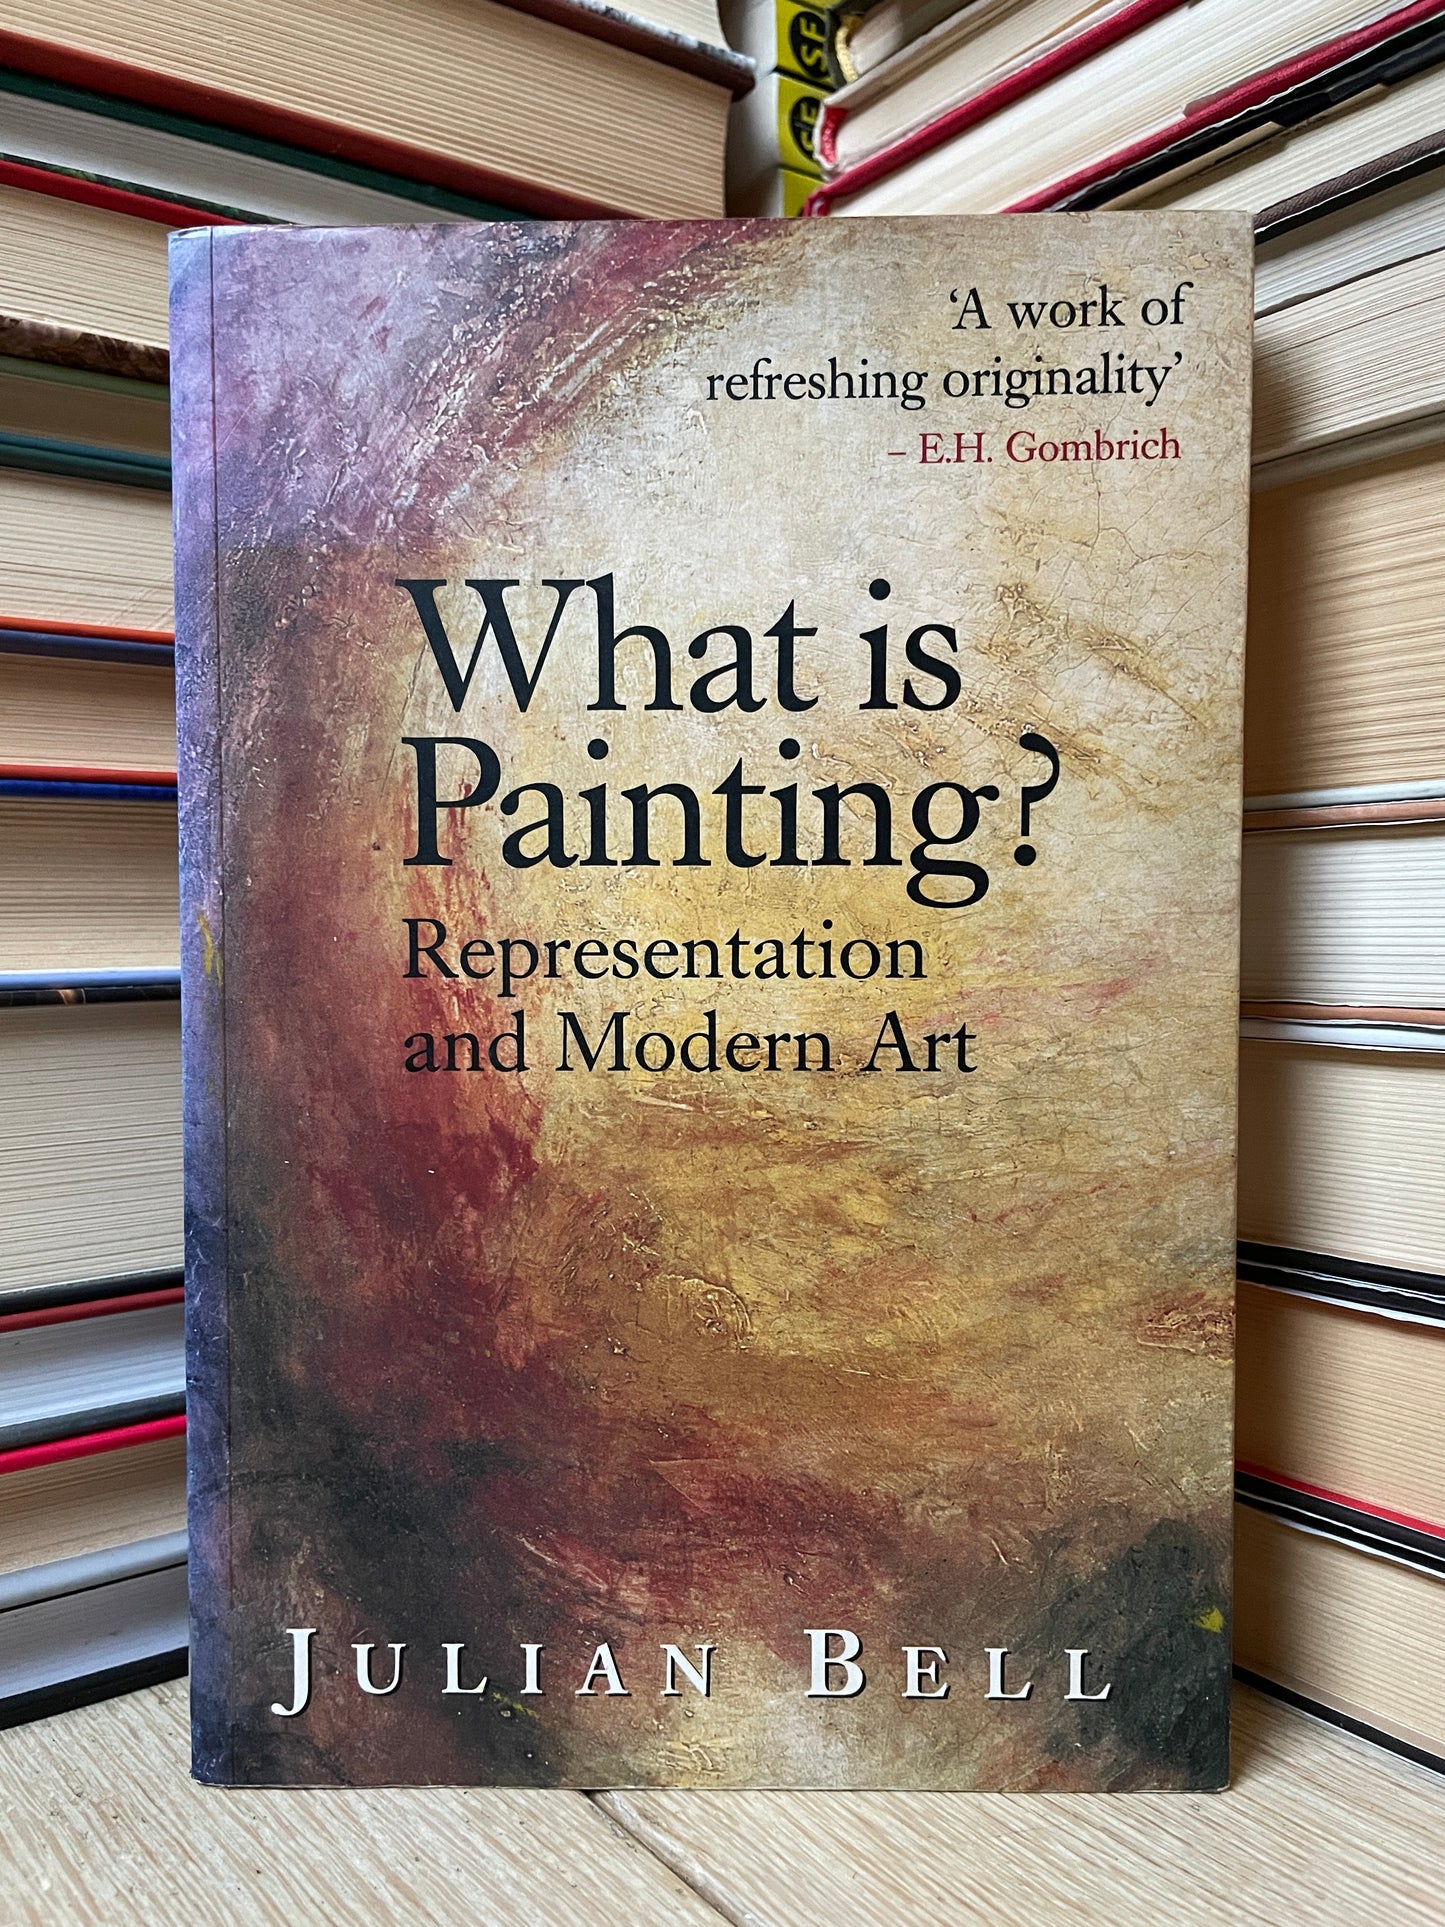 Julian Bell - What is Painting? Representation and Modern Art